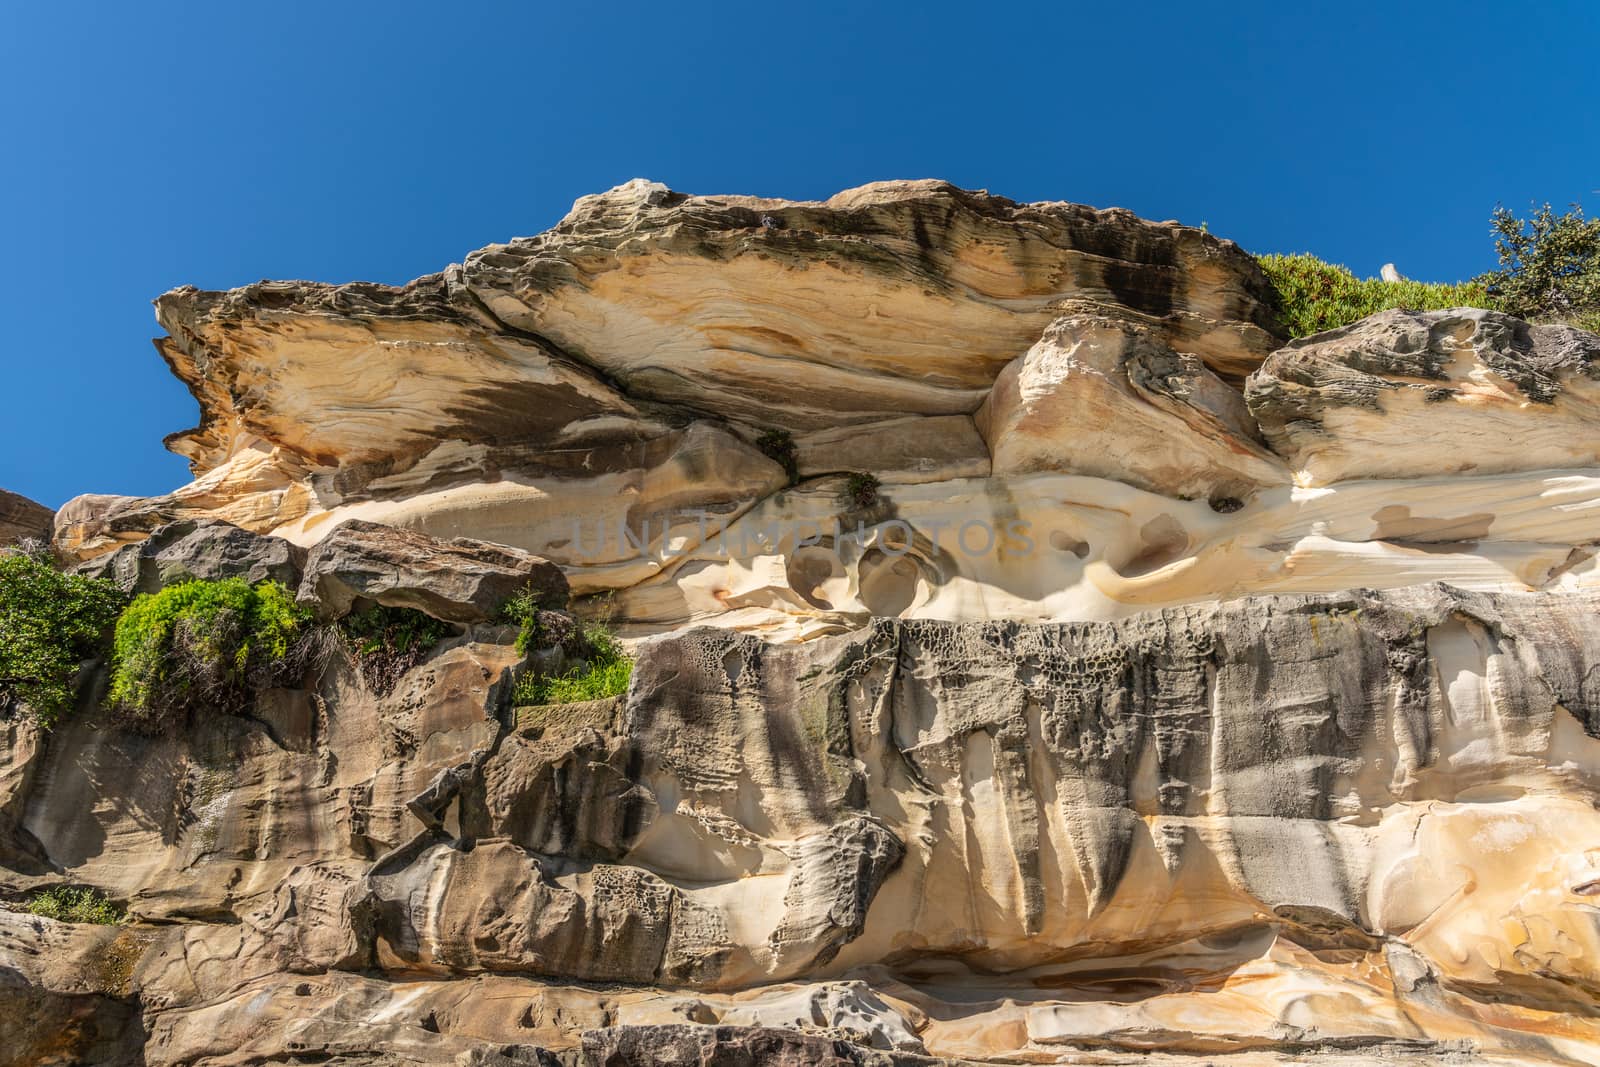 Sydney, Australia - February 11, 2019: Oyster Shell like rock formation made by erosion on South shore cliffs overlooking Bronte Beach under blue sky. Some green vegetation on side. Dominant yellows and browns.